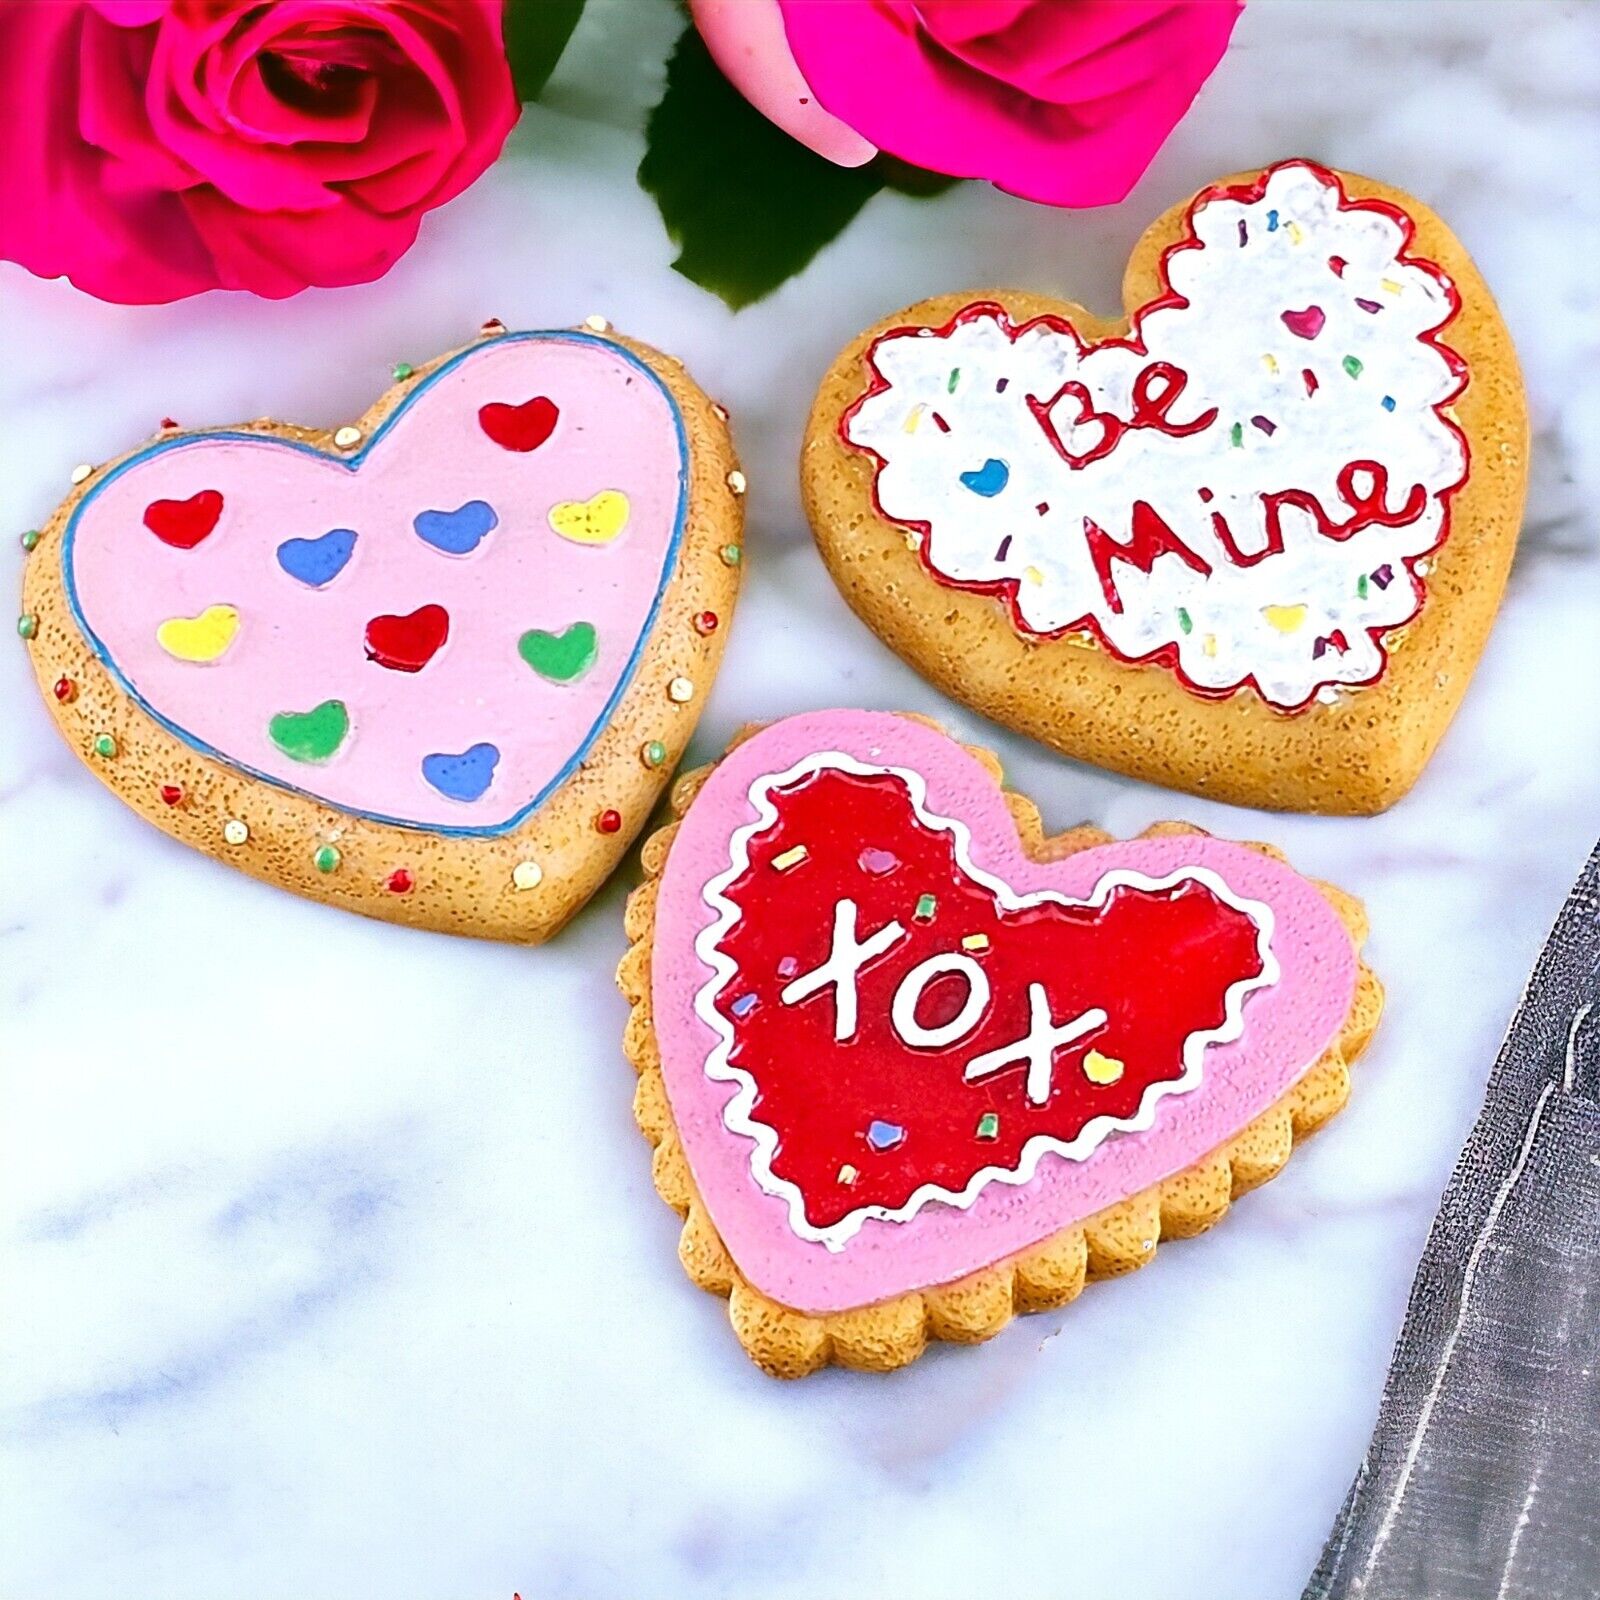 VTG Fridge Magnets Valentine Baked Cookies Kitschy Colorful Hearts Be Mine XOXO